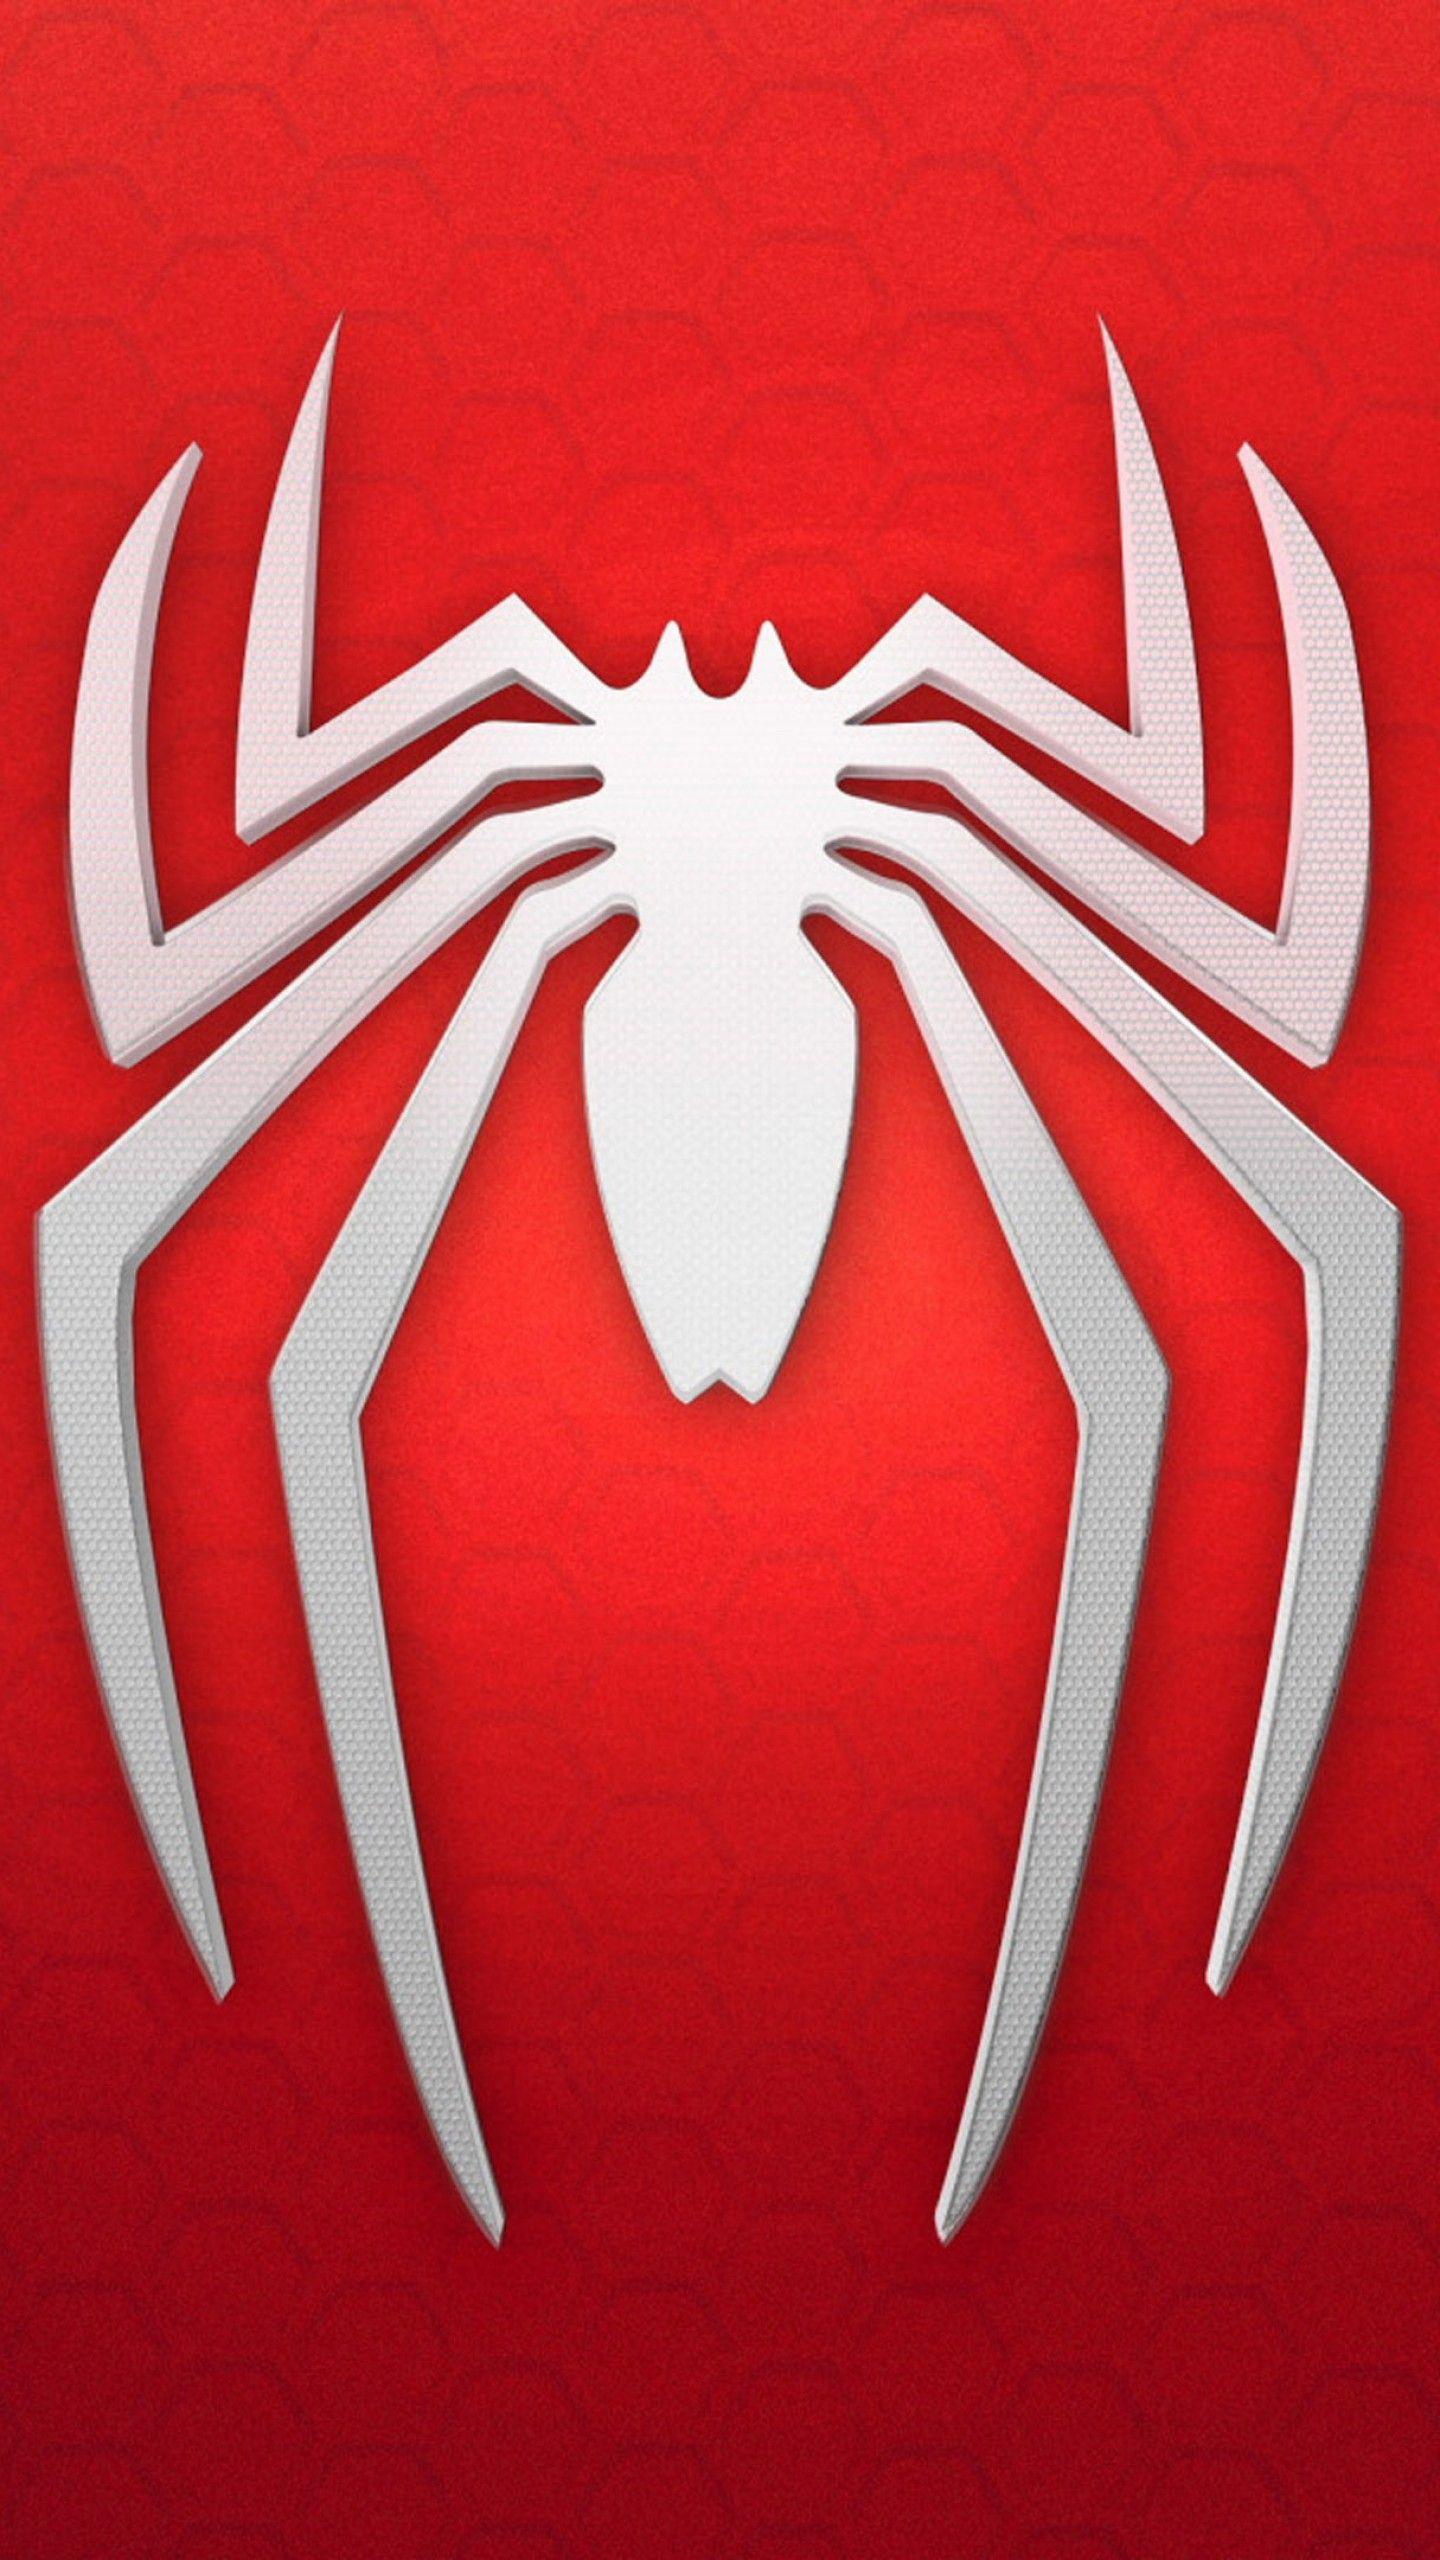 Spider-Man Logo White Phone Wallpapers - Top Free Spider-Man Logo White ...